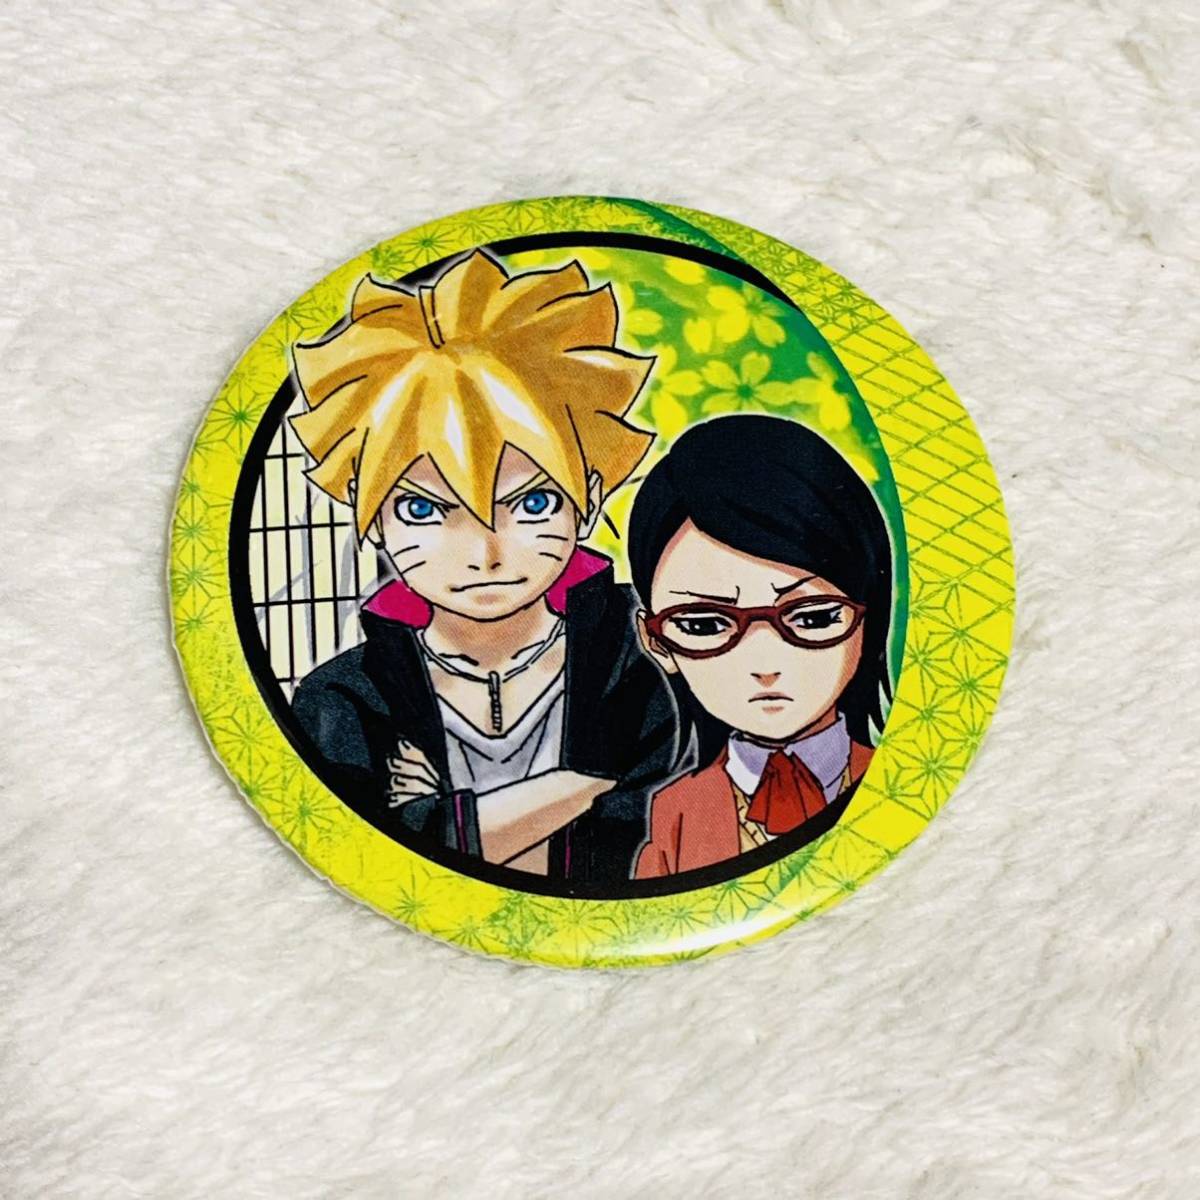 Naruto ナルト 疾風伝 Naruto展 原作 コレクション缶バッジ 缶バッジ うずまき ボルト うちは サラダ Product Details Yahoo Auctions Japan Proxy Bidding And Shopping Service From Japan